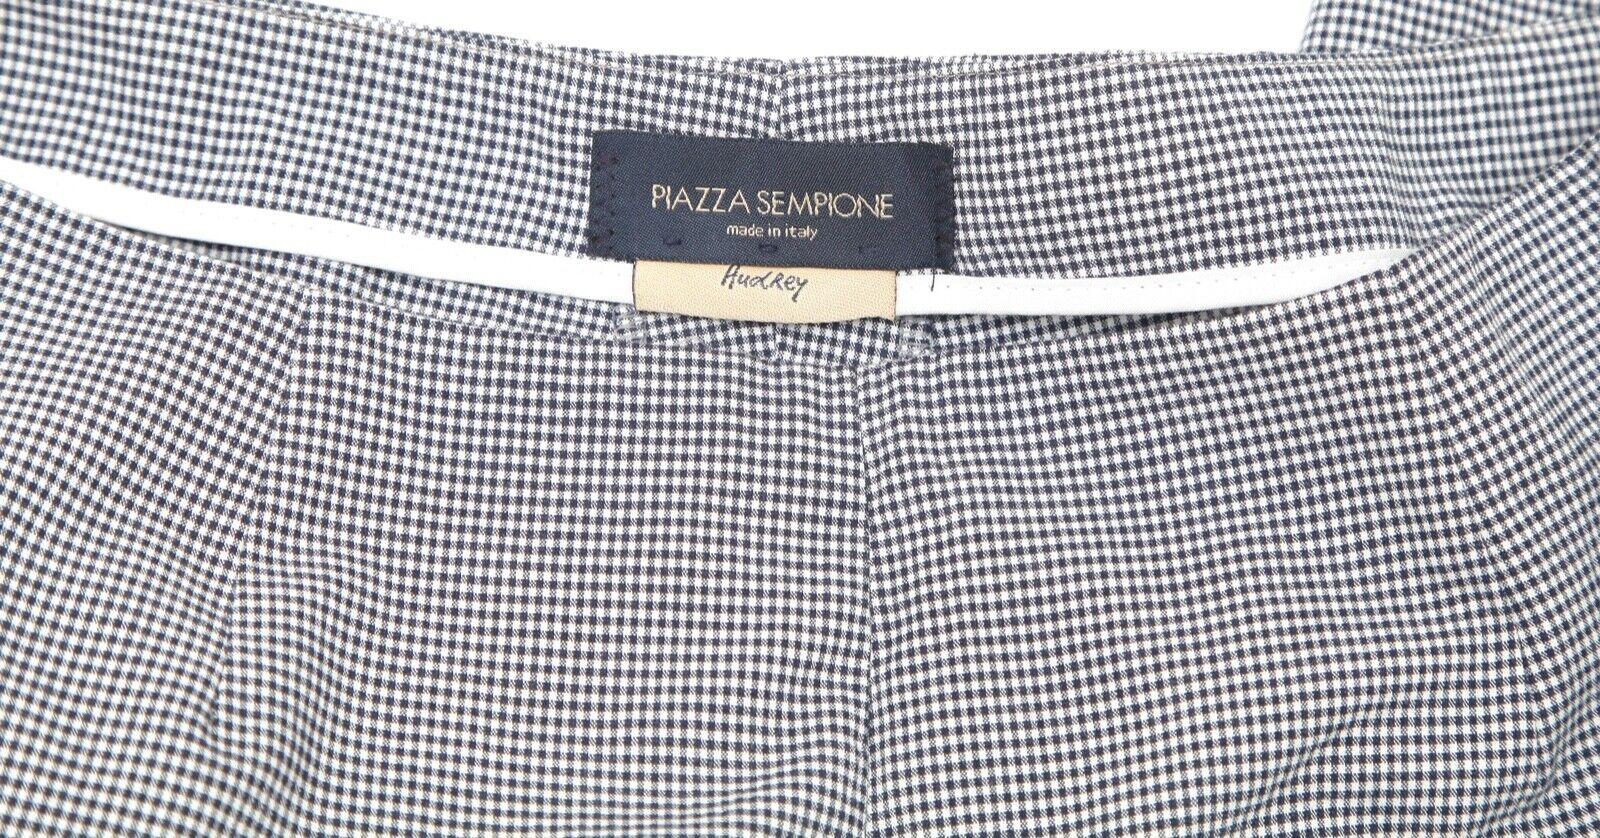 PIAZZA SEMPIONE Pant Cropped Leg Gingham Black White Cotton Blend Side Zipper 48 In Excellent Condition For Sale In Hollywood, FL